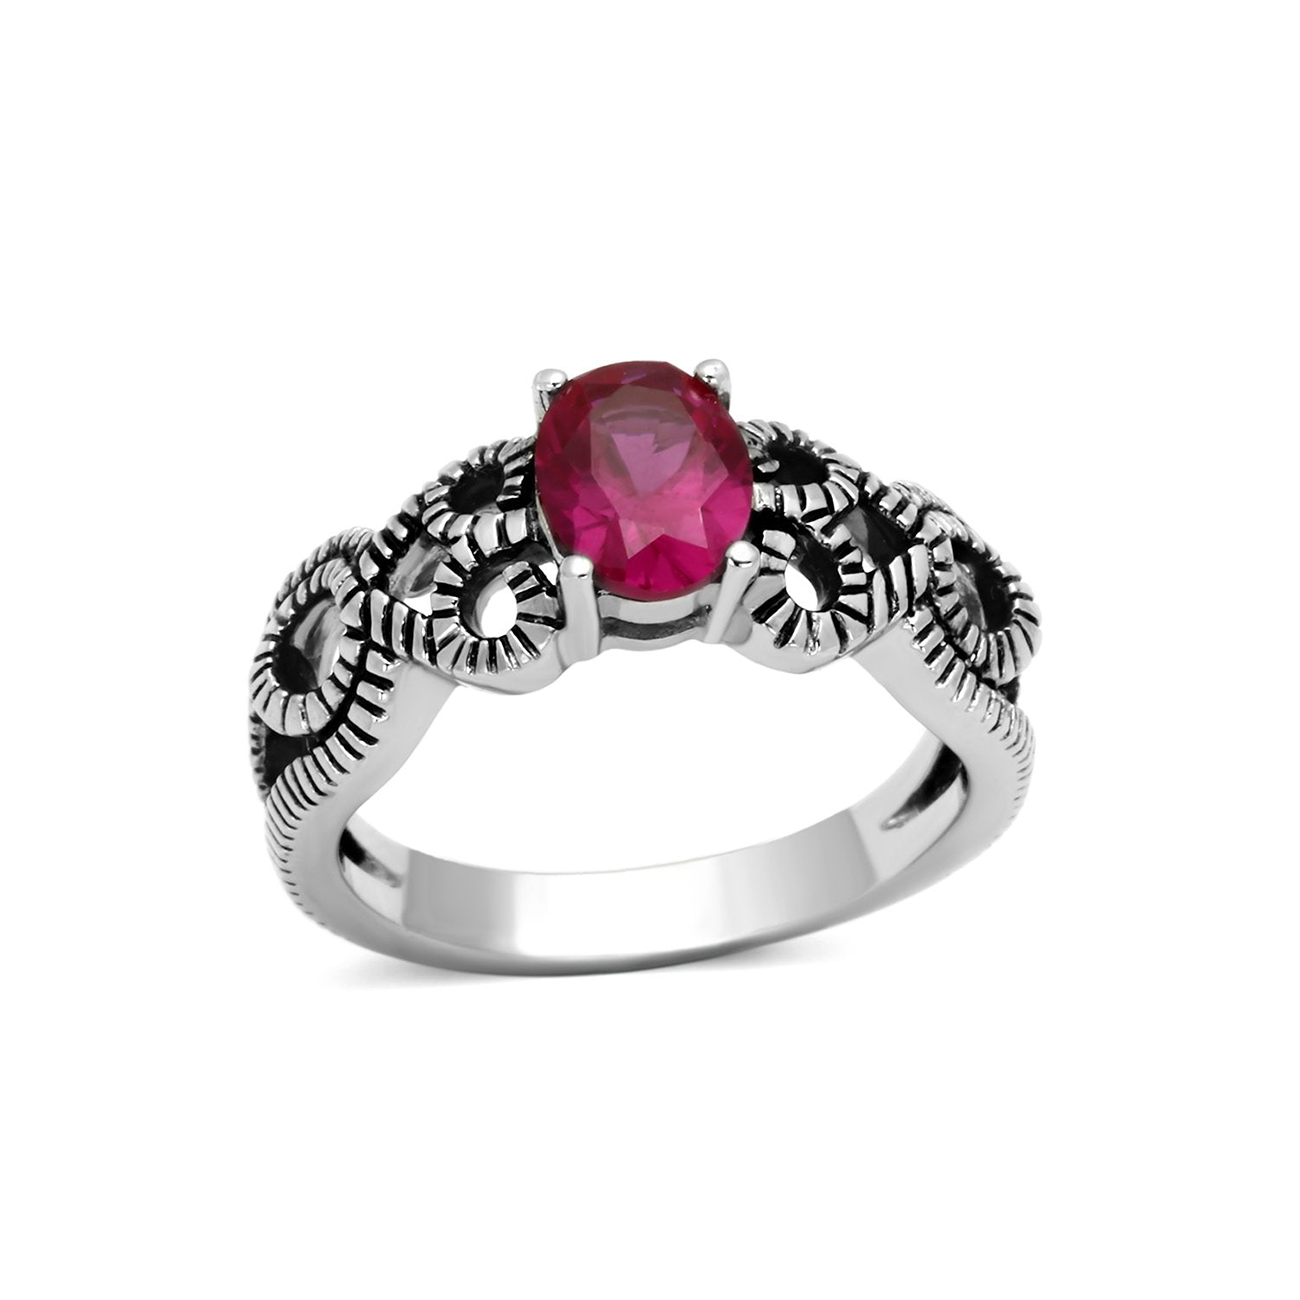 Sweet Fantasy - Beautiful Women's Red Ruby Stainless Steel O